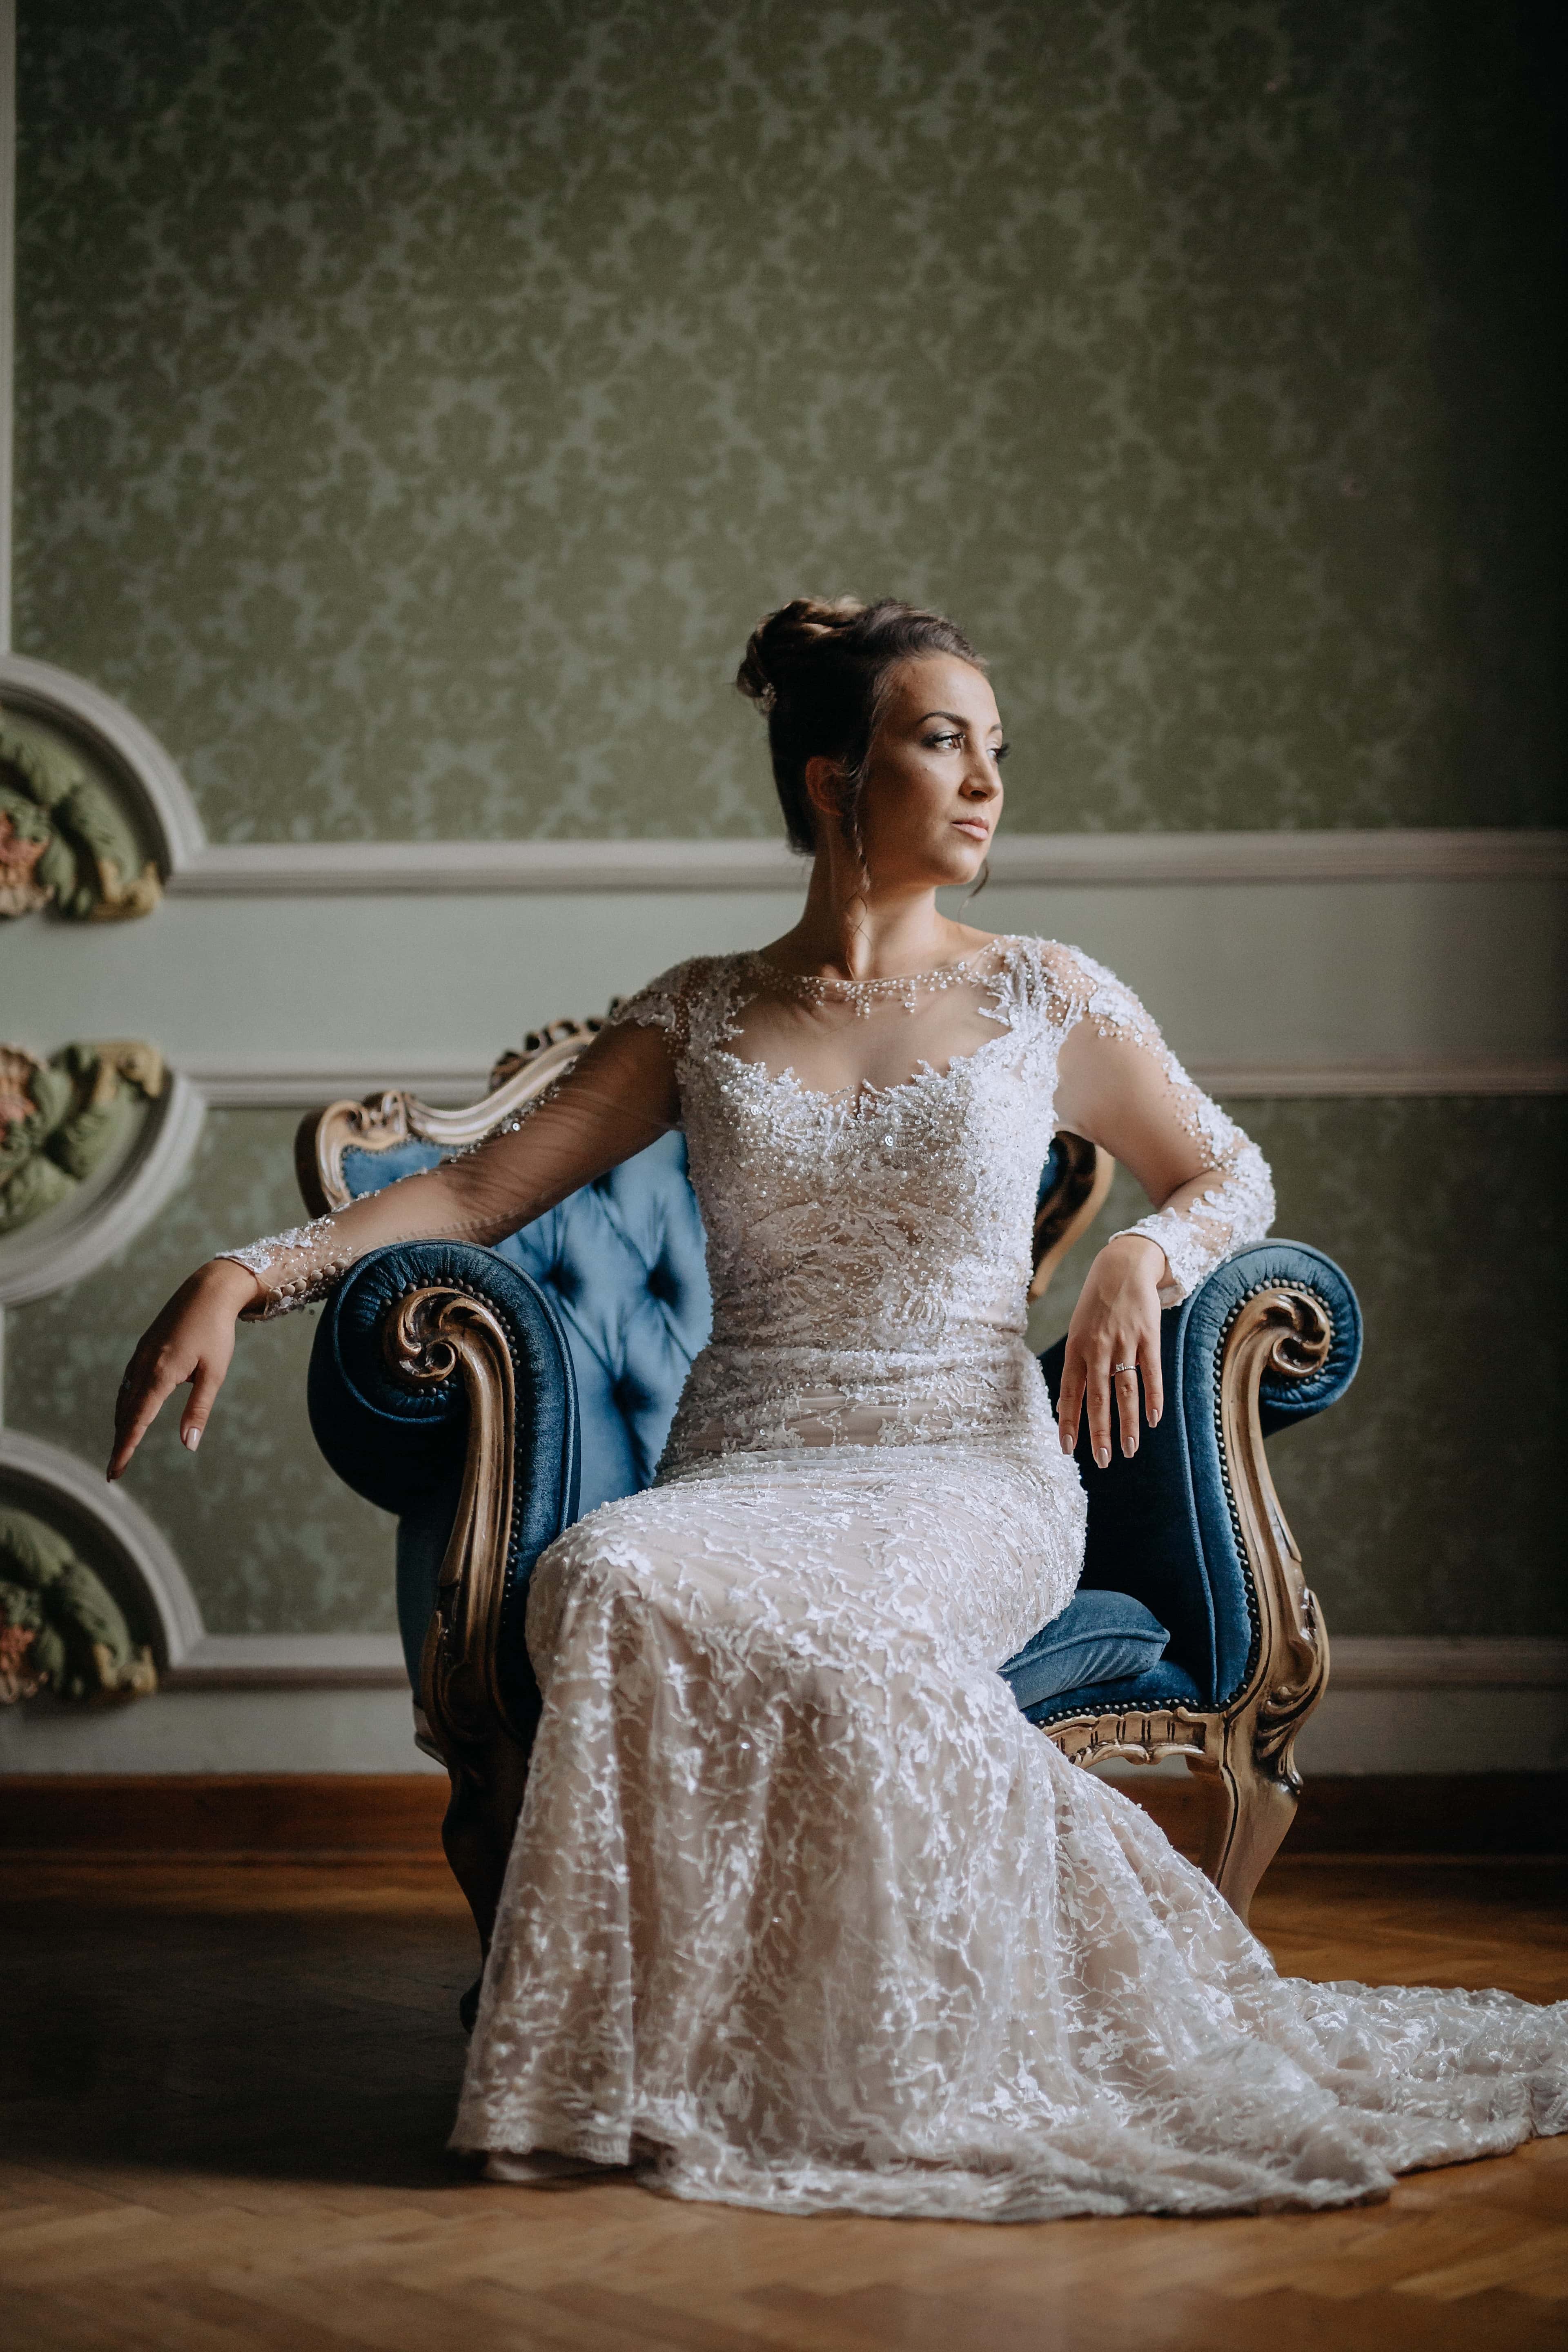 Free picture: sitting, woman, fancy, style, armchair, furniture, salon, luxury, baroque, dress